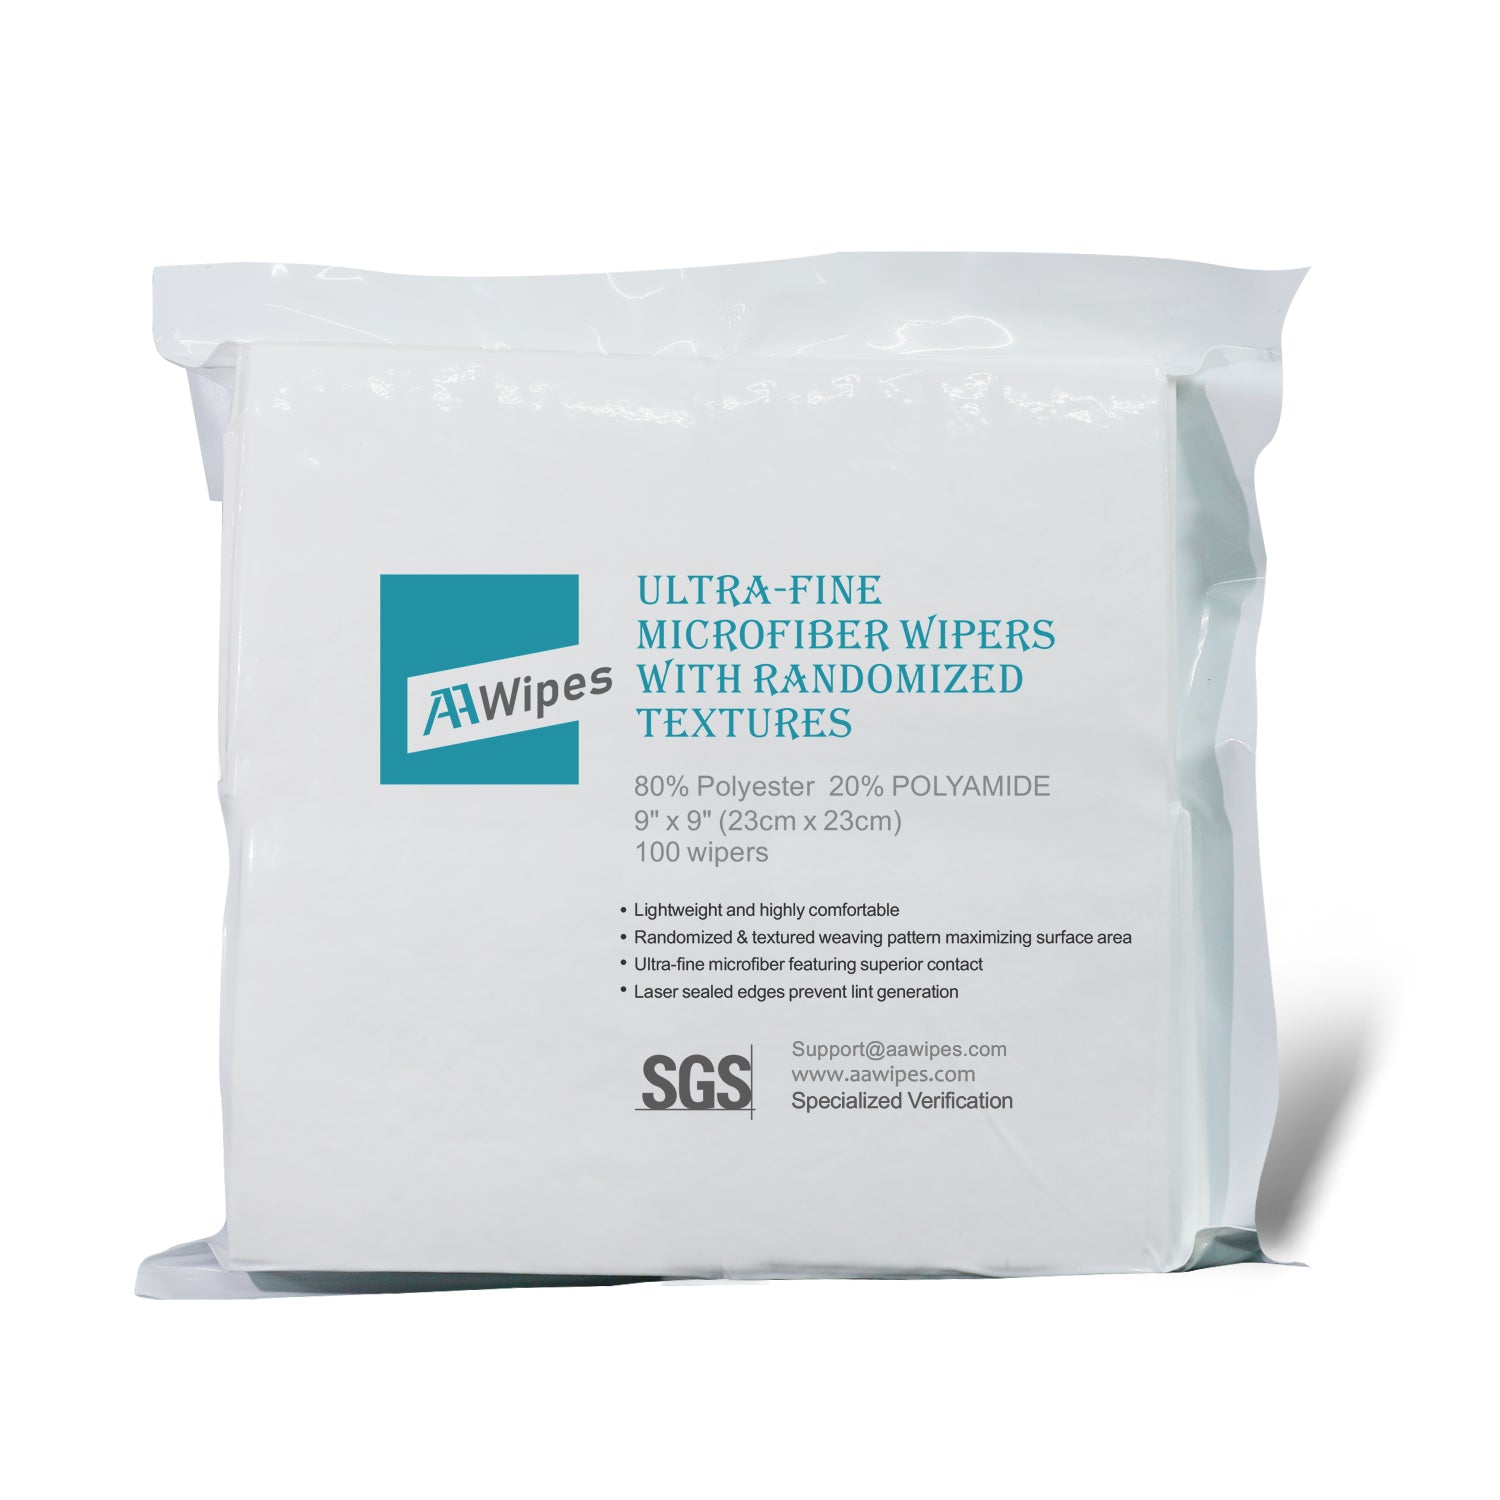 Superfine Microfiber Wipes Irregular Woven Linen 9"x9" (Starting at 1 Box 3,000 Wipes per 30 Bags) (No. MFR14009)